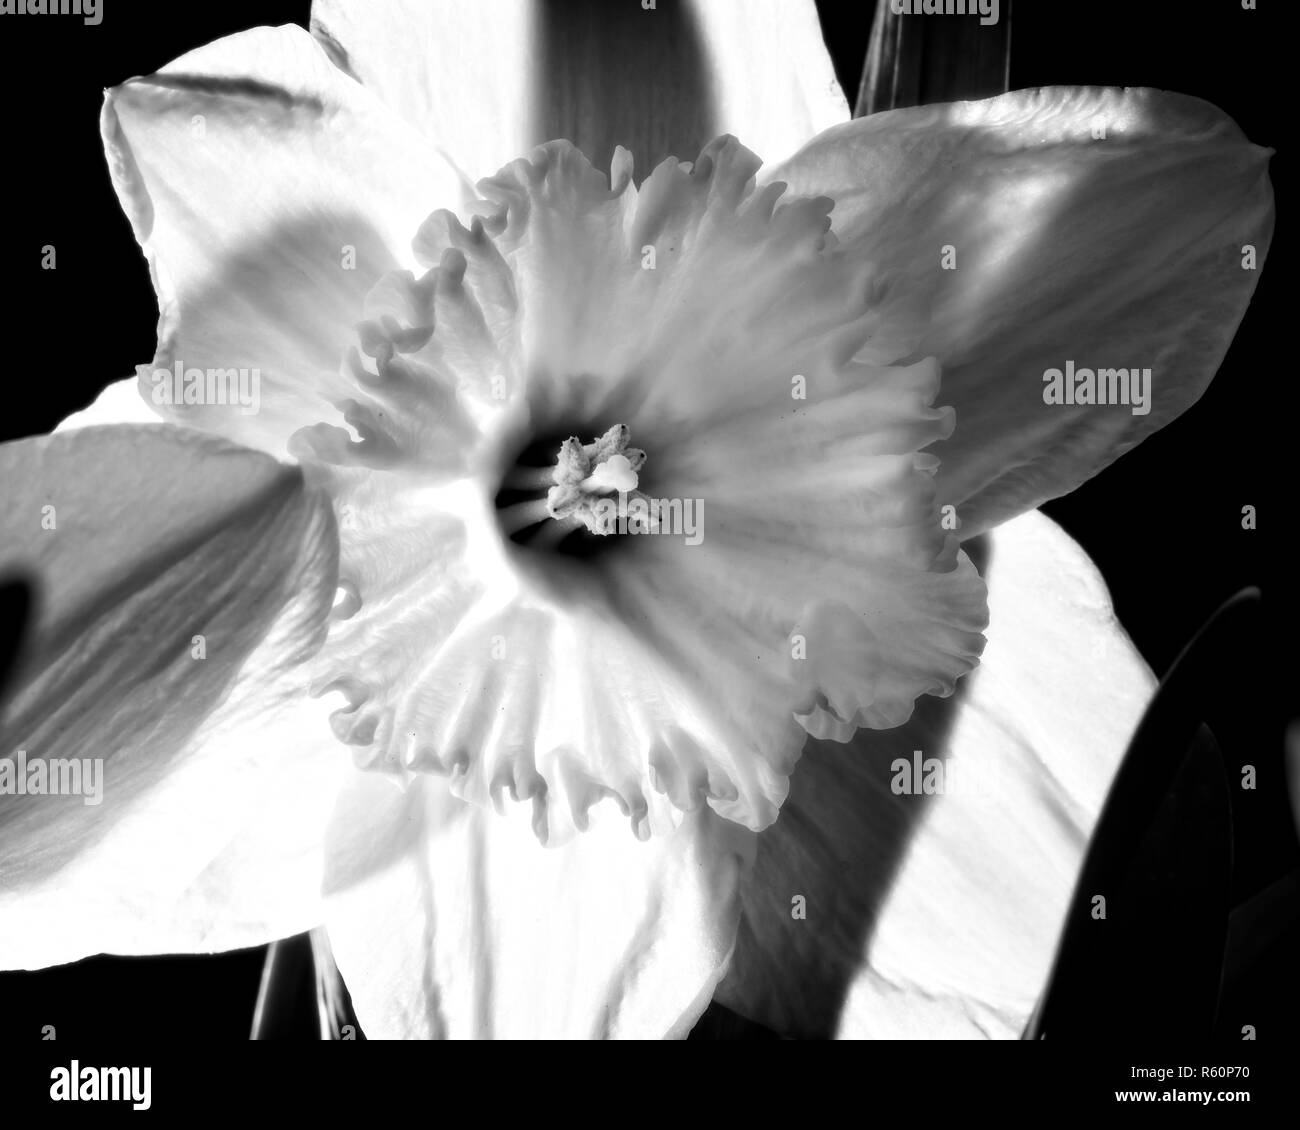 Back lit Black and White Close up of Daffodil flower, showing translucent glow and transparent pedals Stock Photo